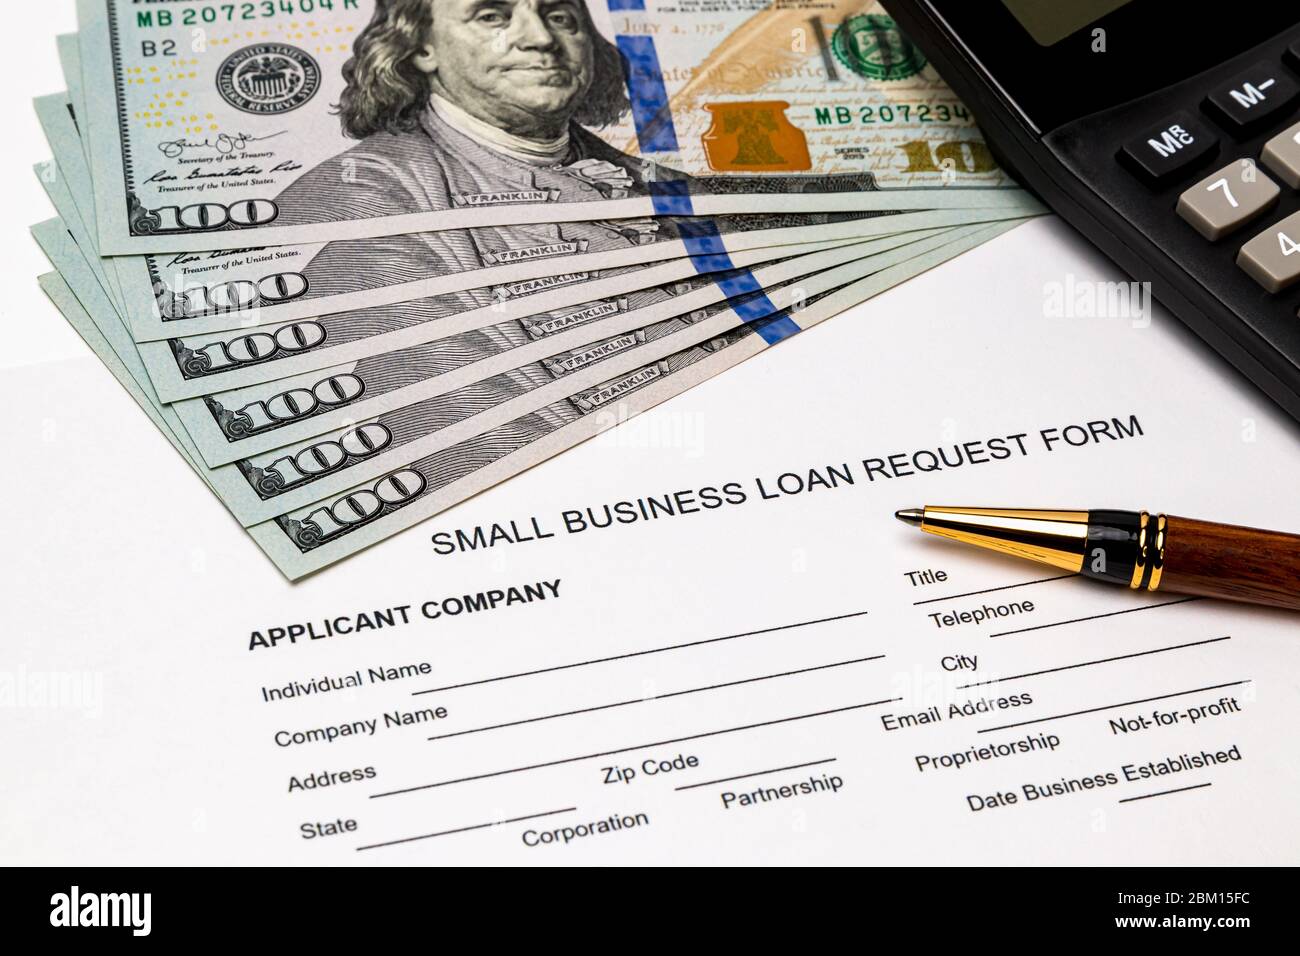 Small business loan form, 100 dollar bills. Concept of financial assistance, stimulus payment and recession during Covid-19 coronavirus pandemic Stock Photo